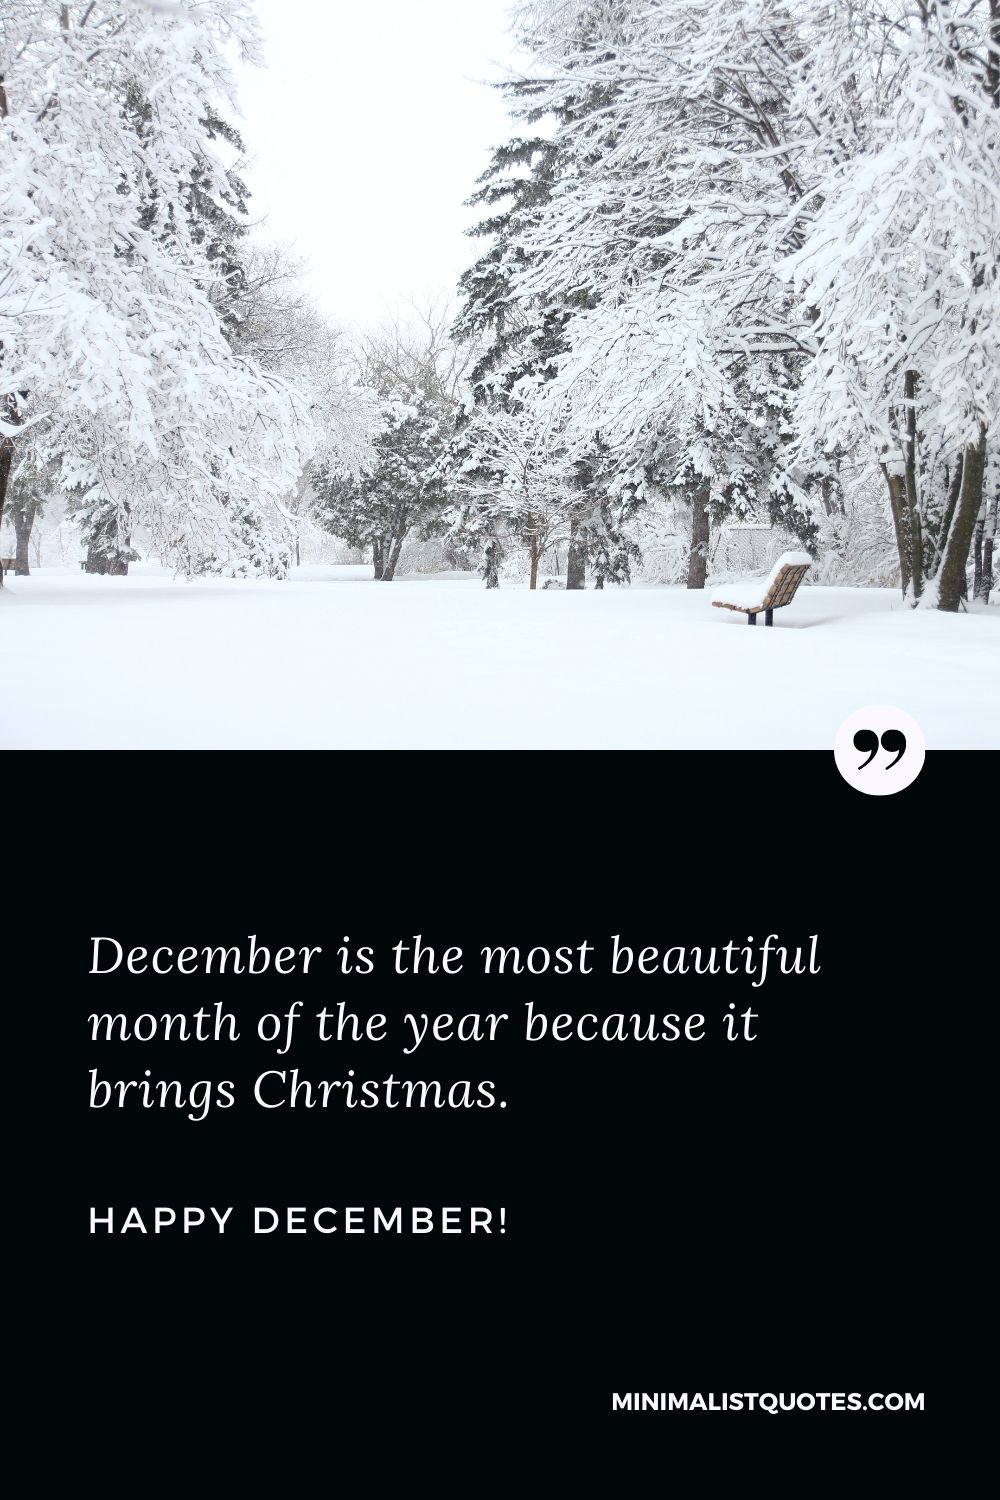 December is the most beautiful month of the year because it brings ...